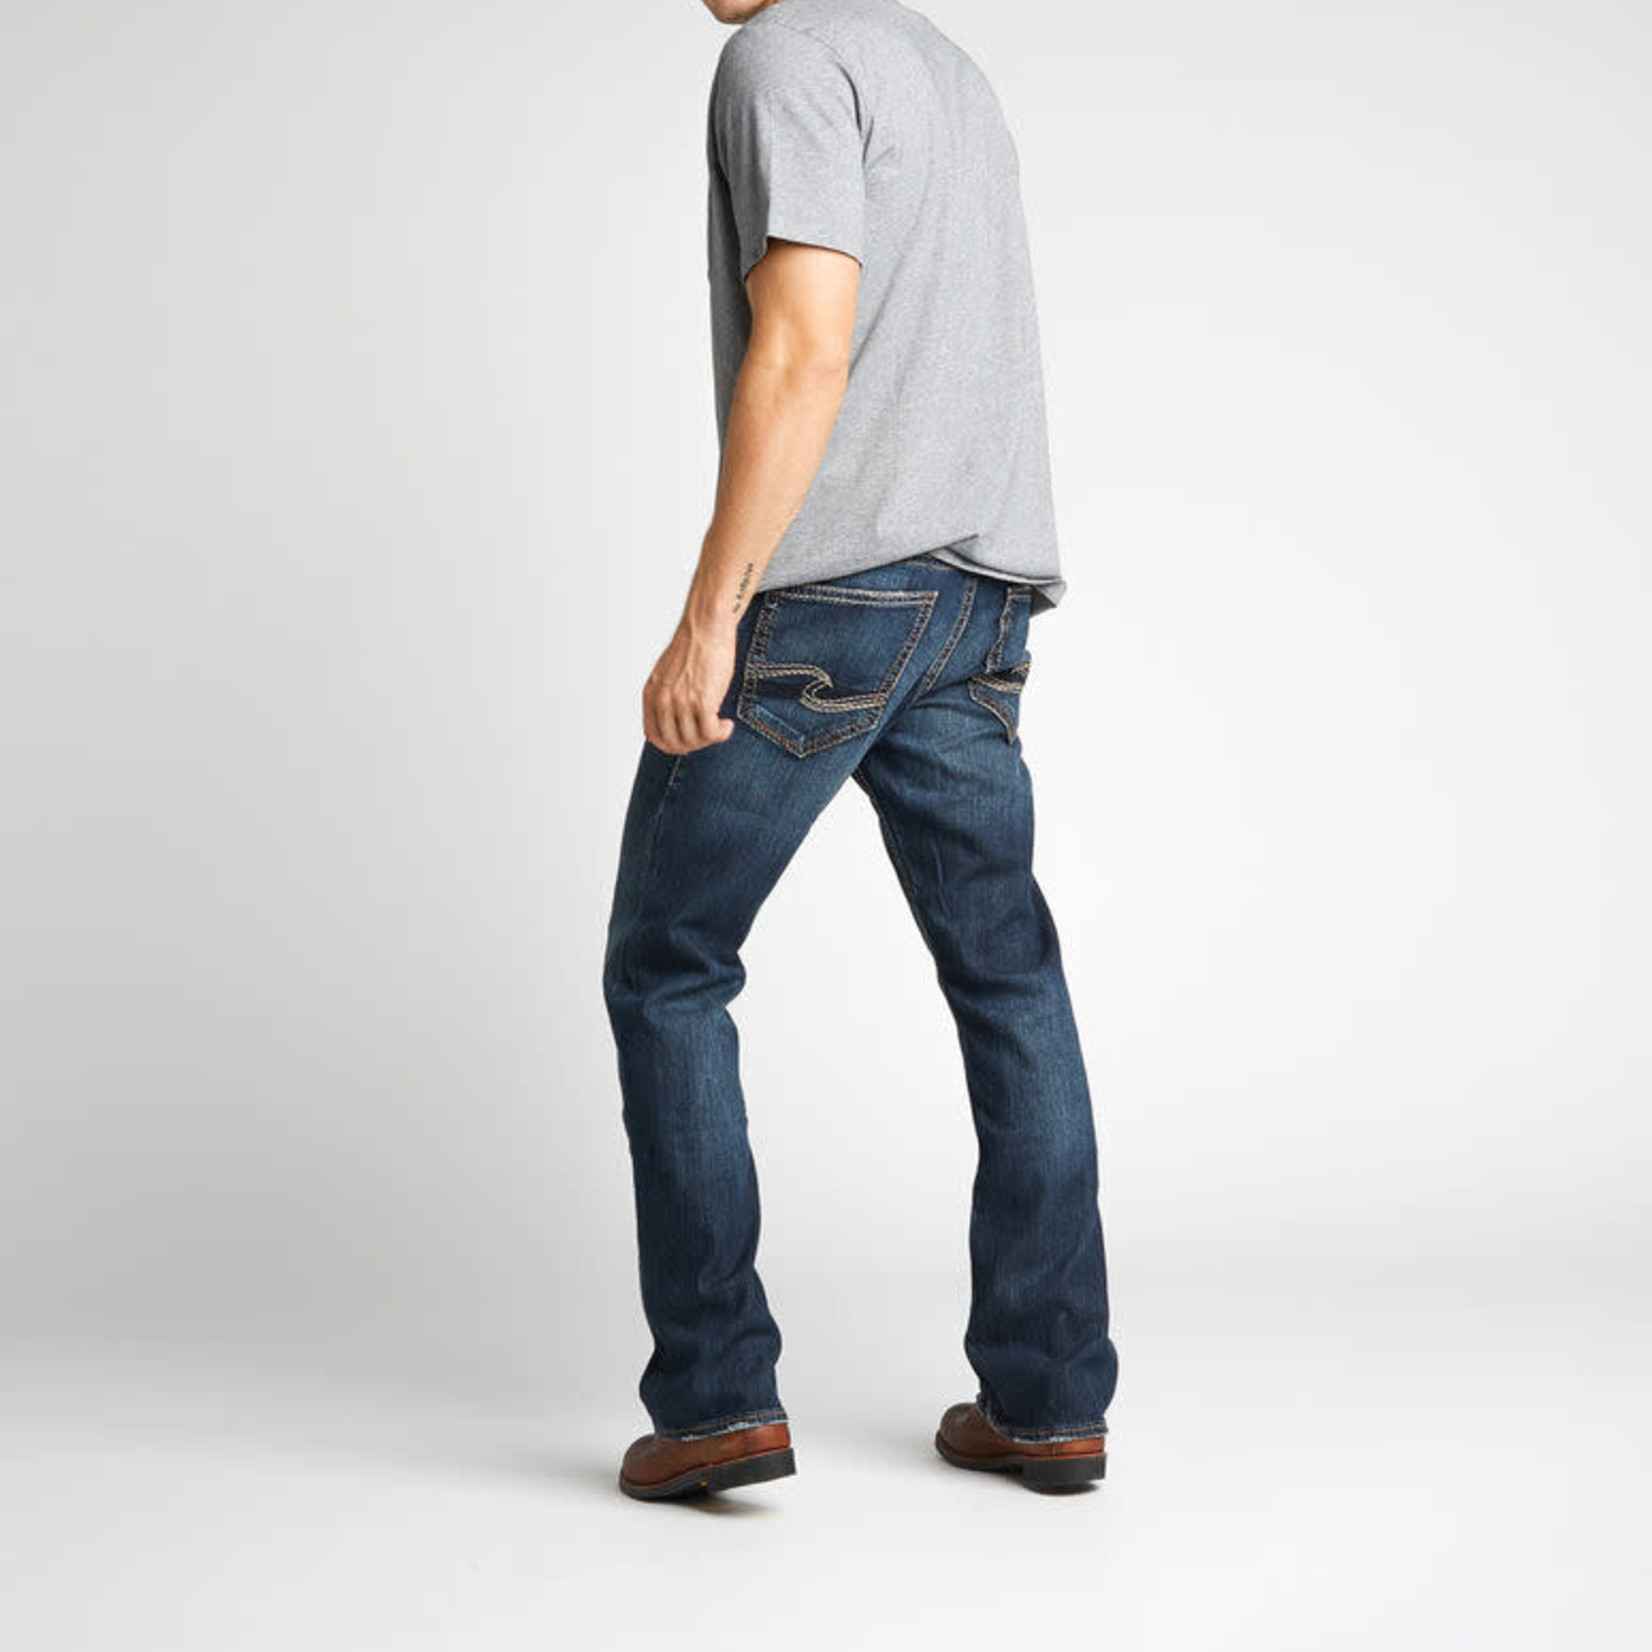 Silver Jeans The "Zac 418" by Silver Jeans